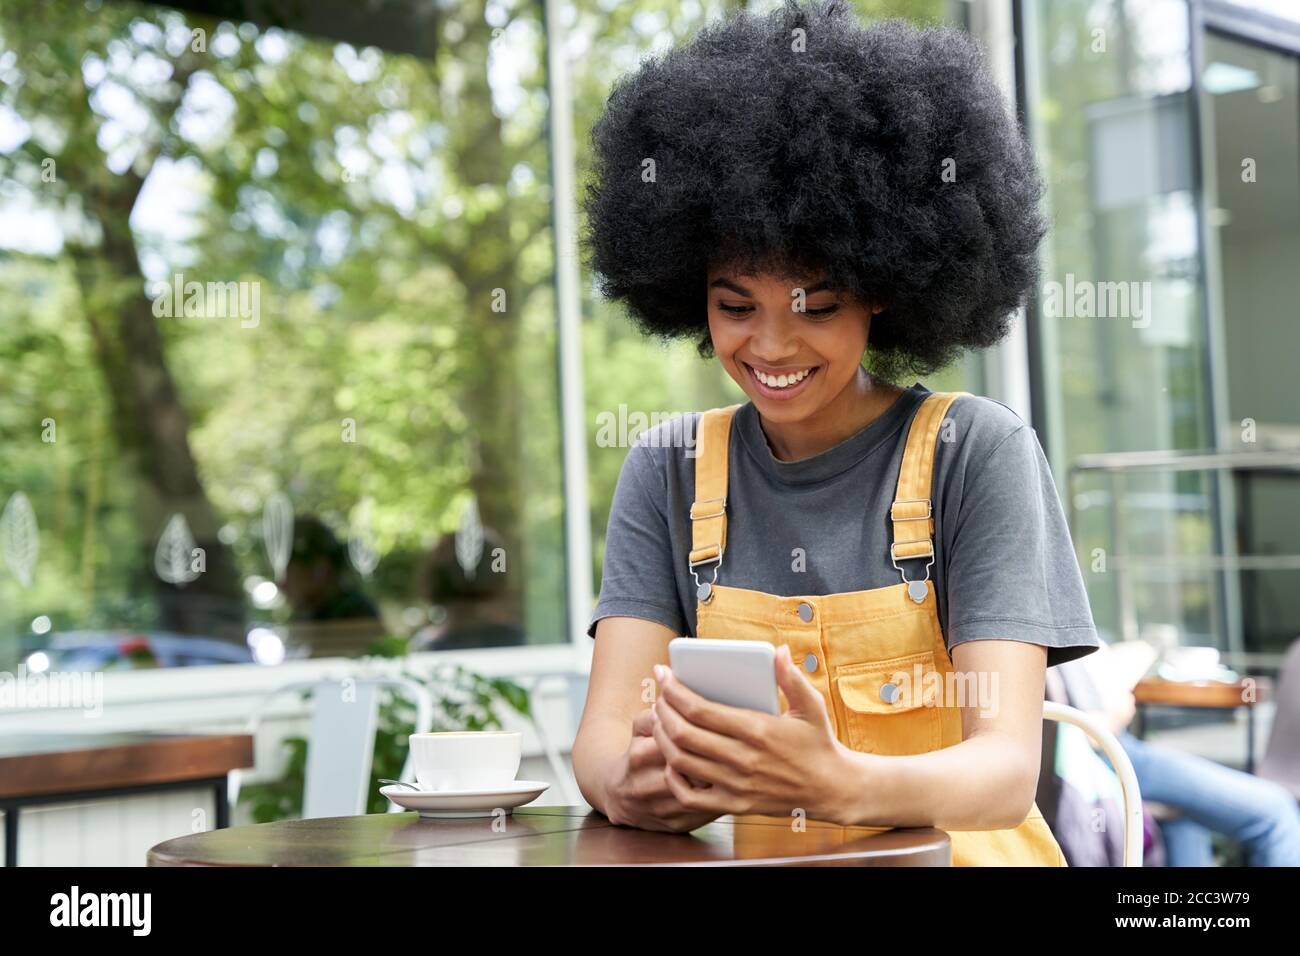 Smiling African hipster teen girl using phone sitting at outdoor cafe table. Stock Photo